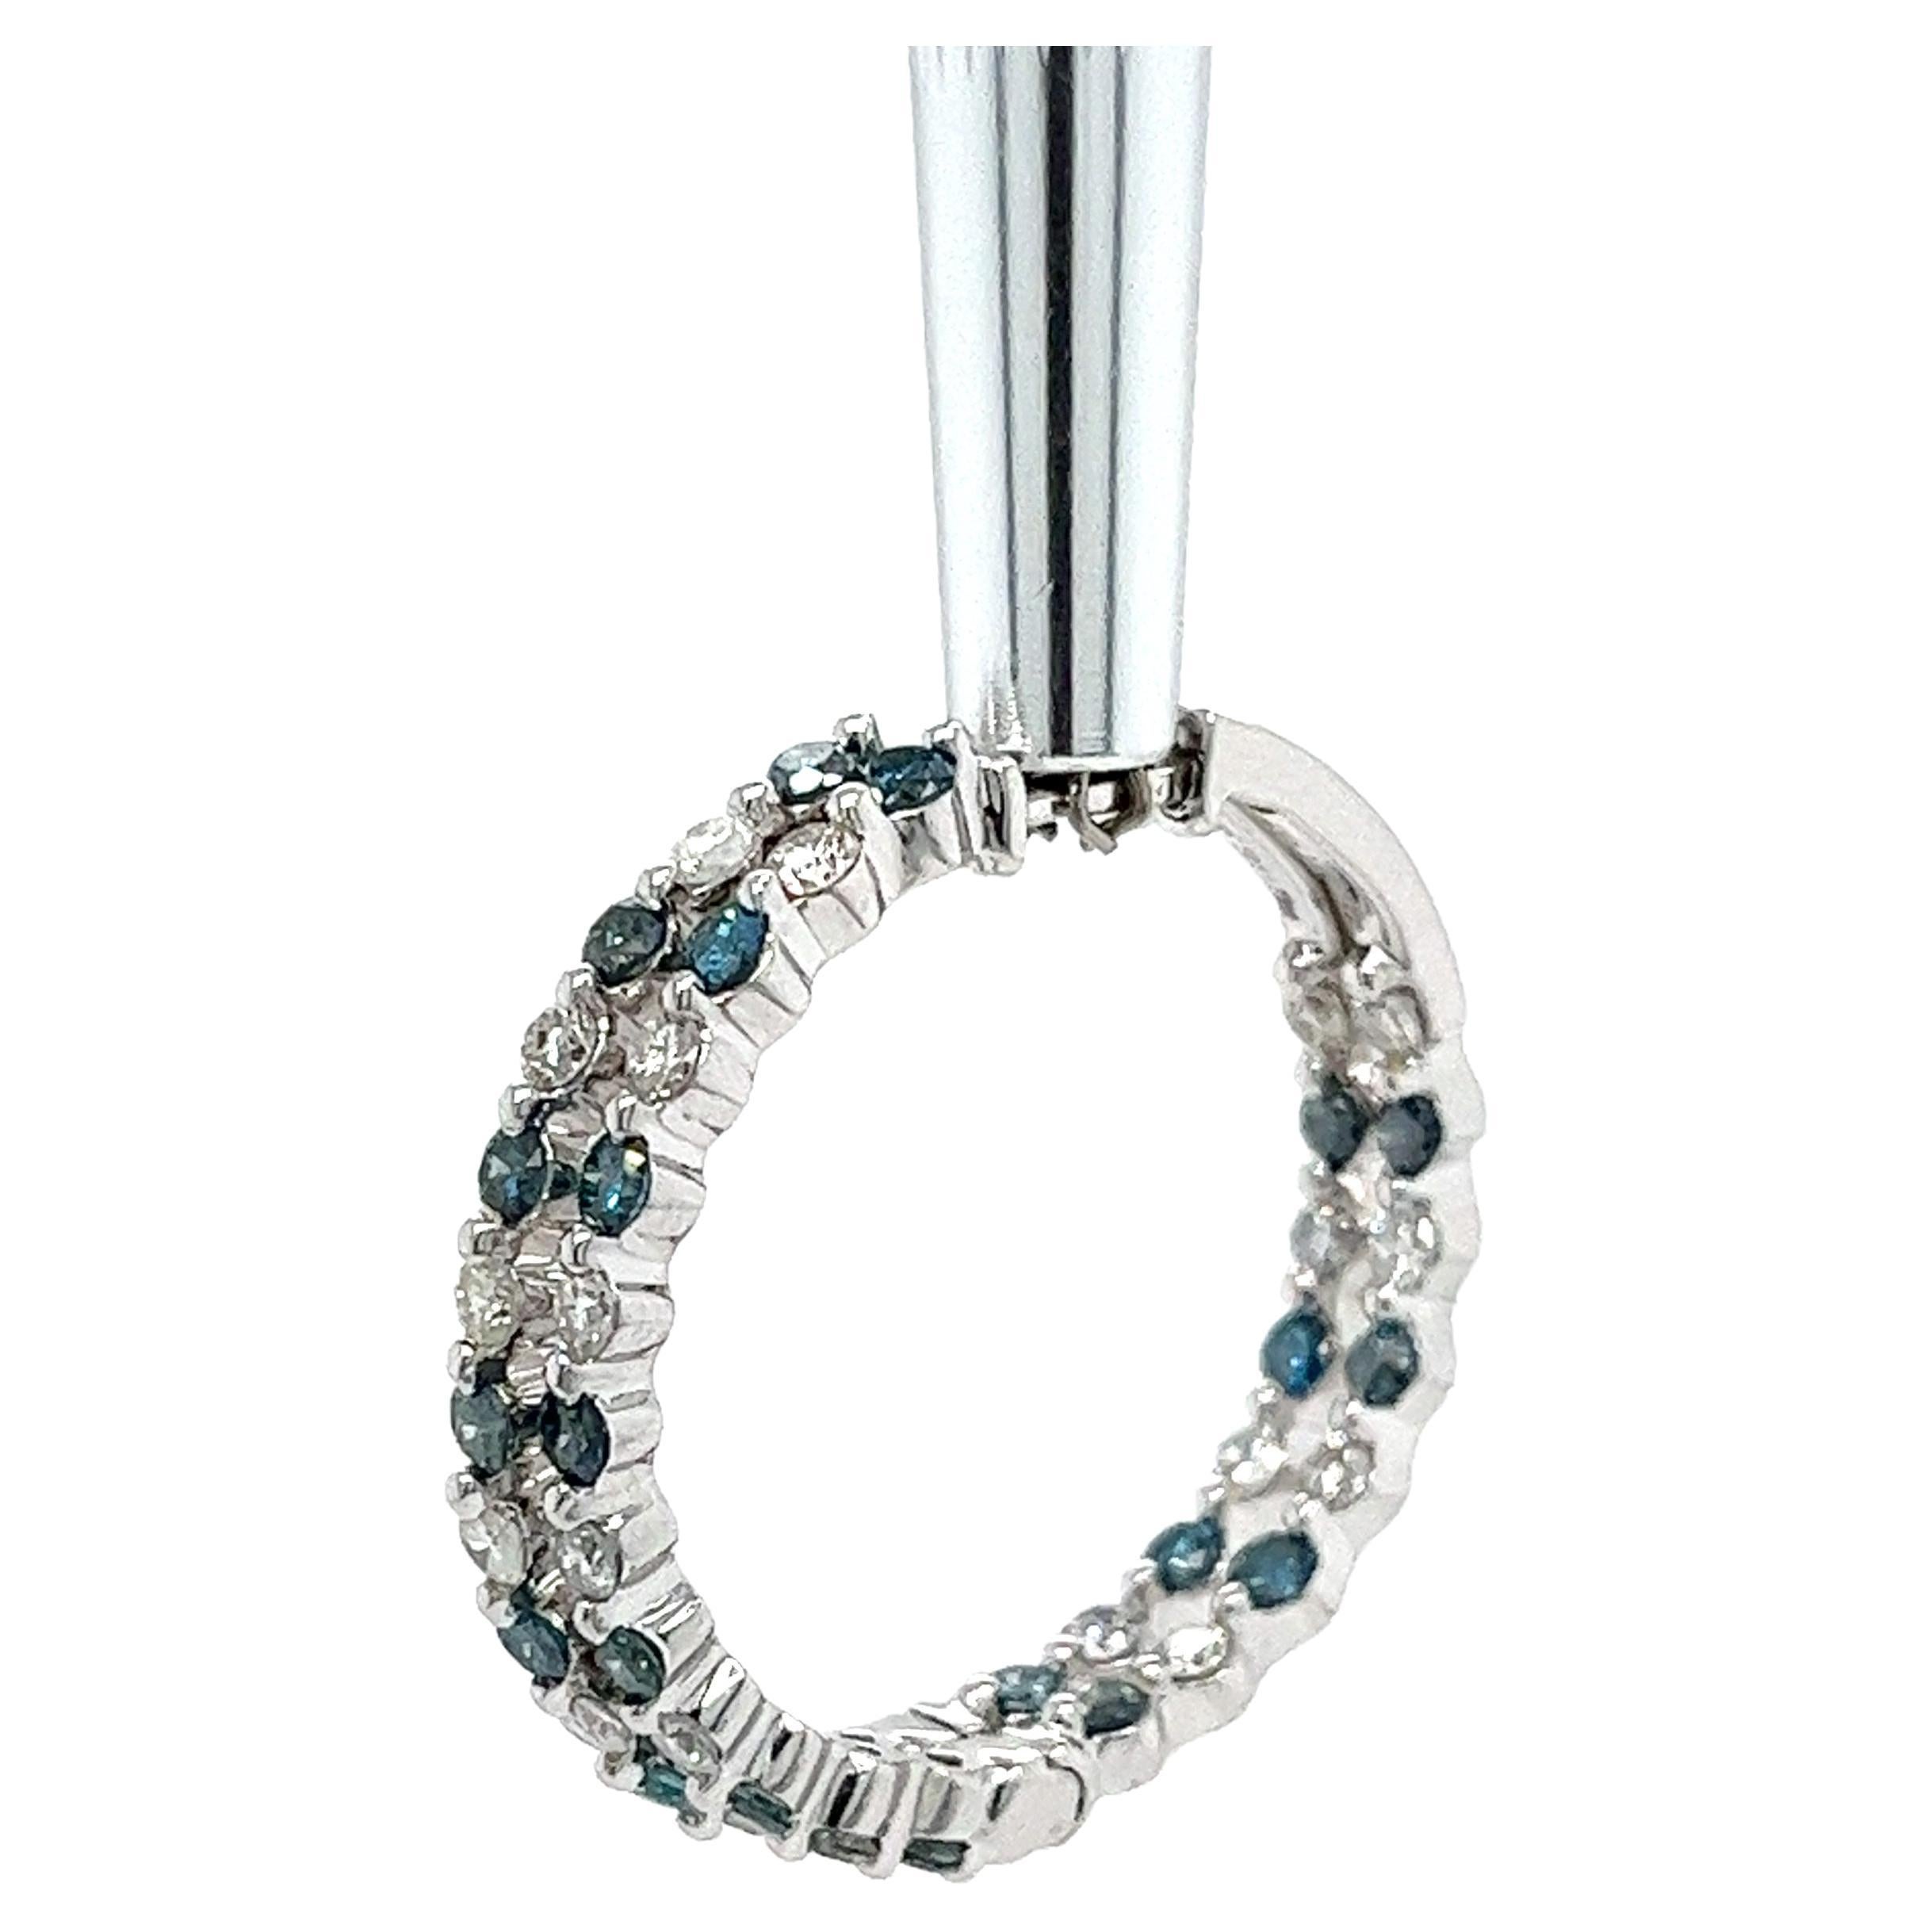 14k white gold sets 42 natural blue and white diamond inside out set hoop earrings. A gorgeous piece with expert jewelry engineering of color & symmetrical contrast. 

These earrings masterfully feature the diamonds on the front and interior back,